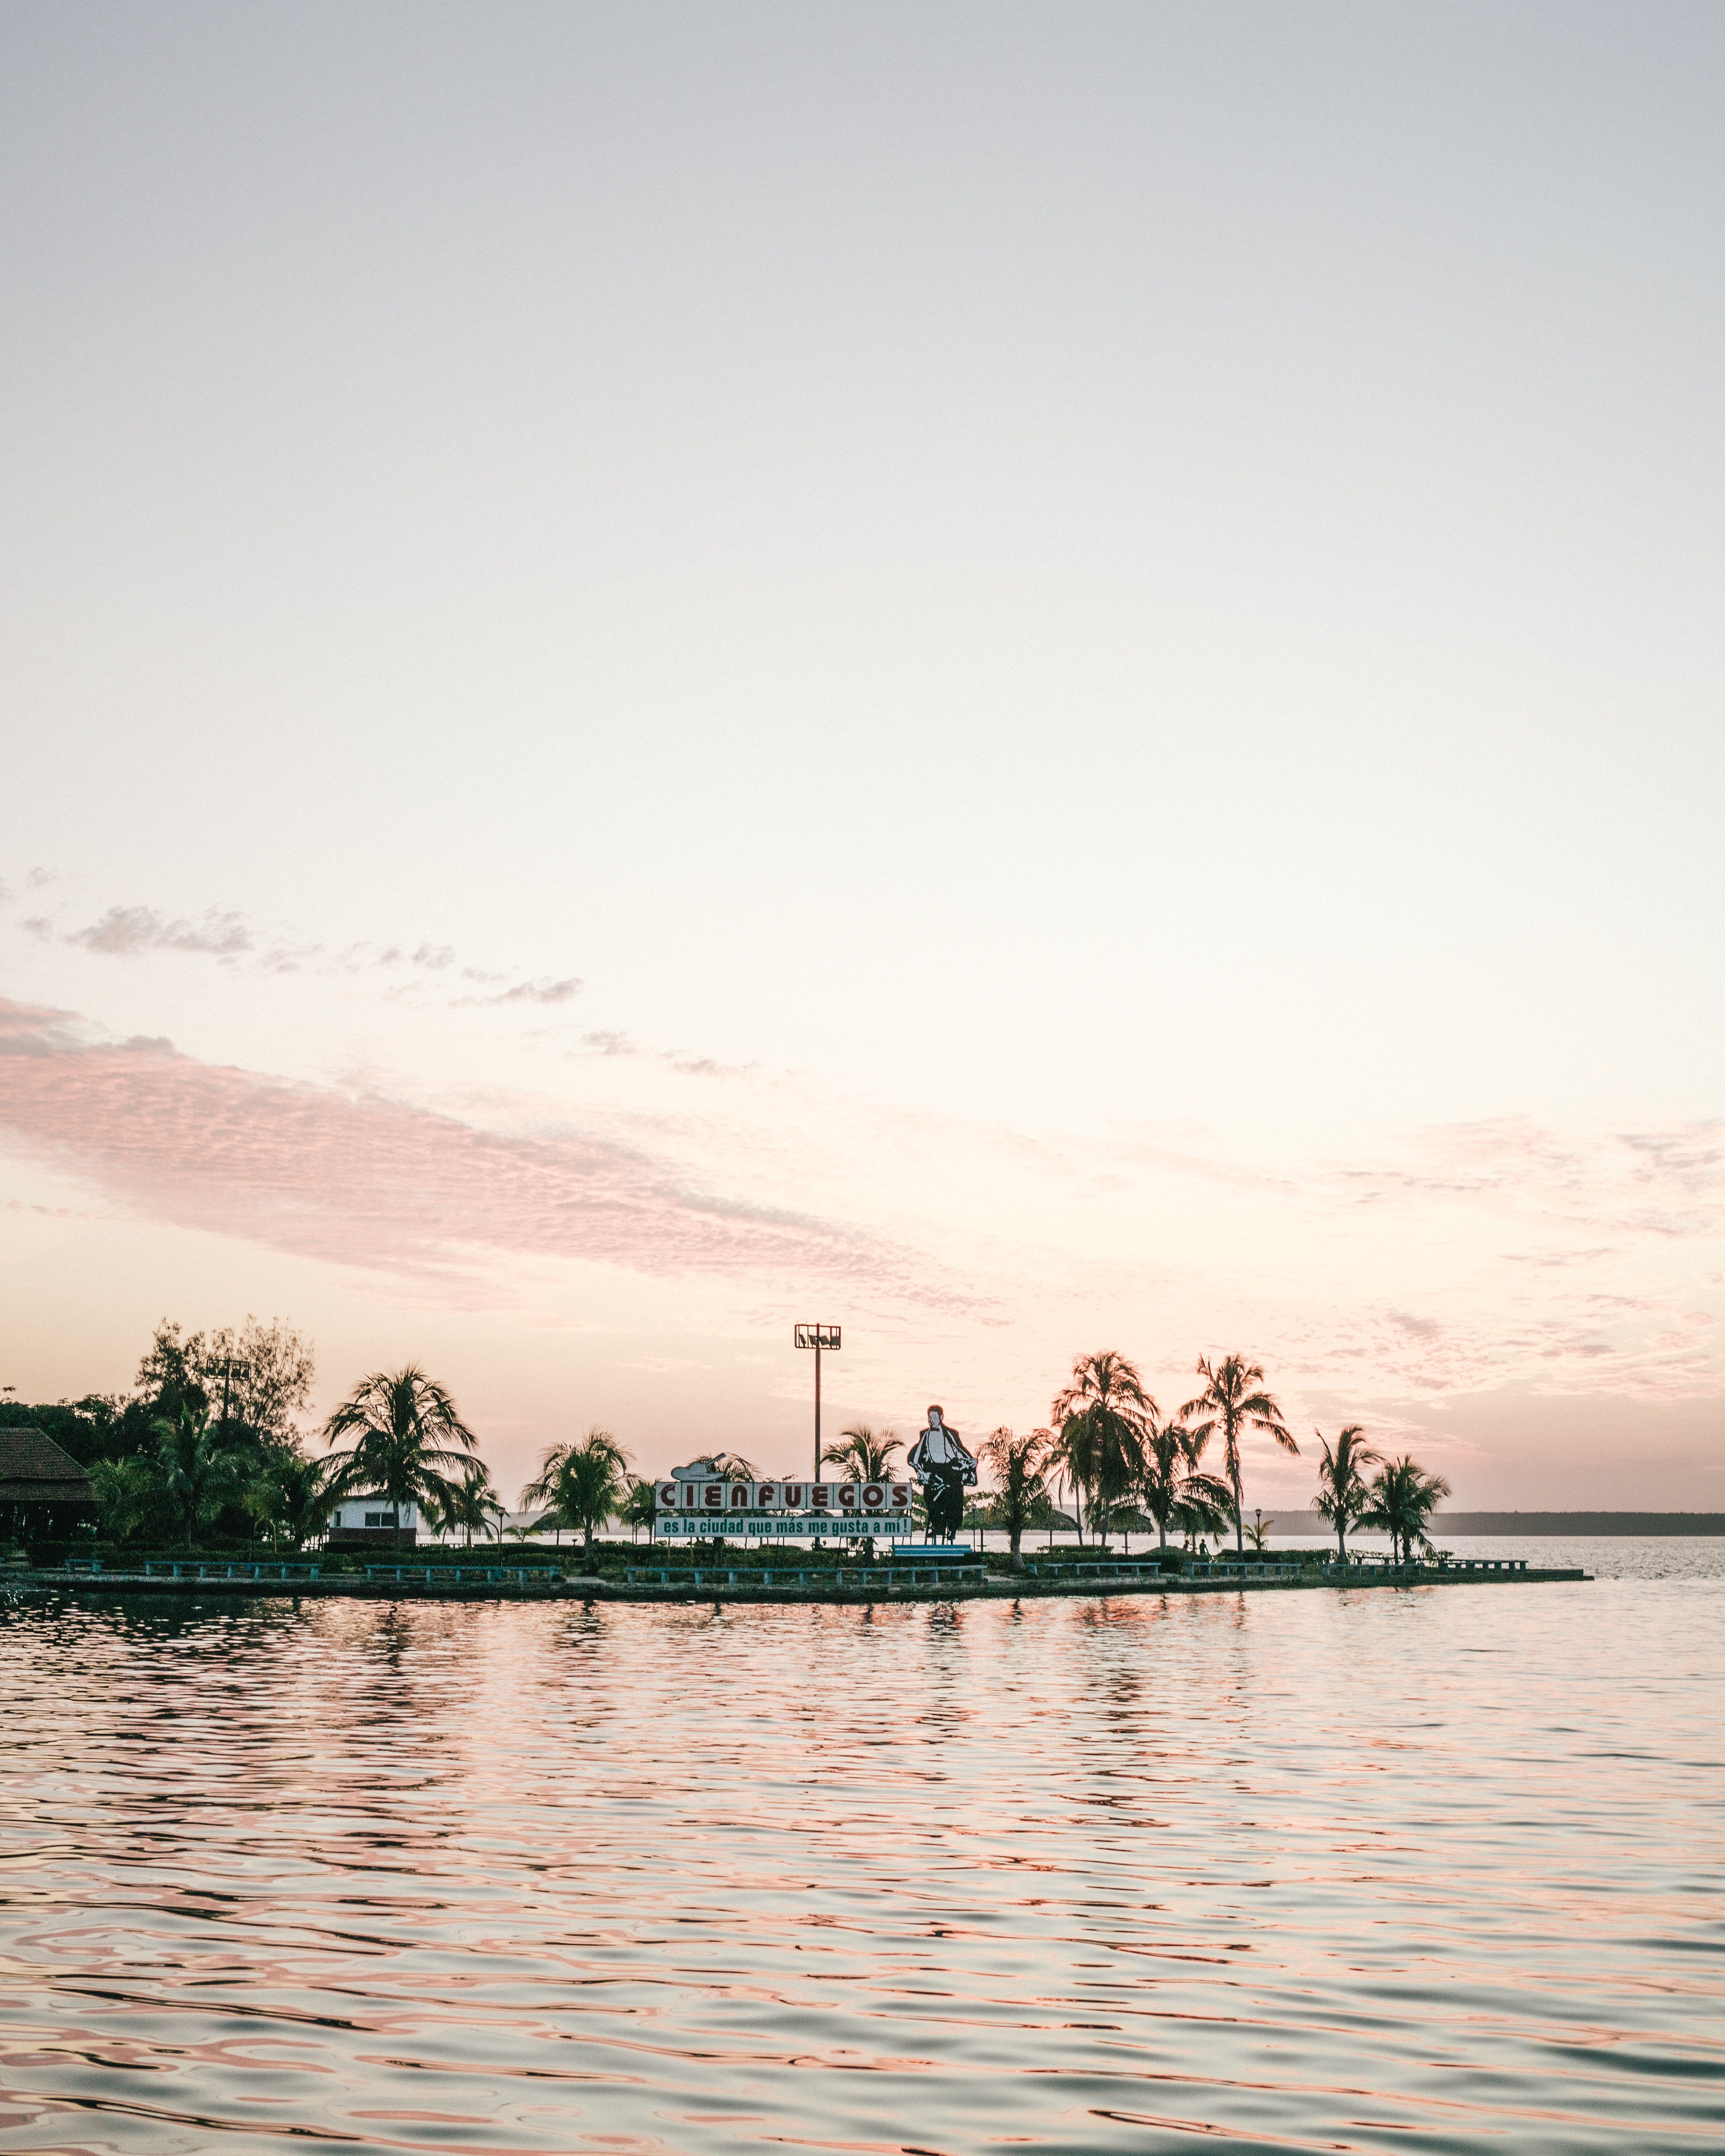 A person standing on a dock near a body of water in Cienfuegos